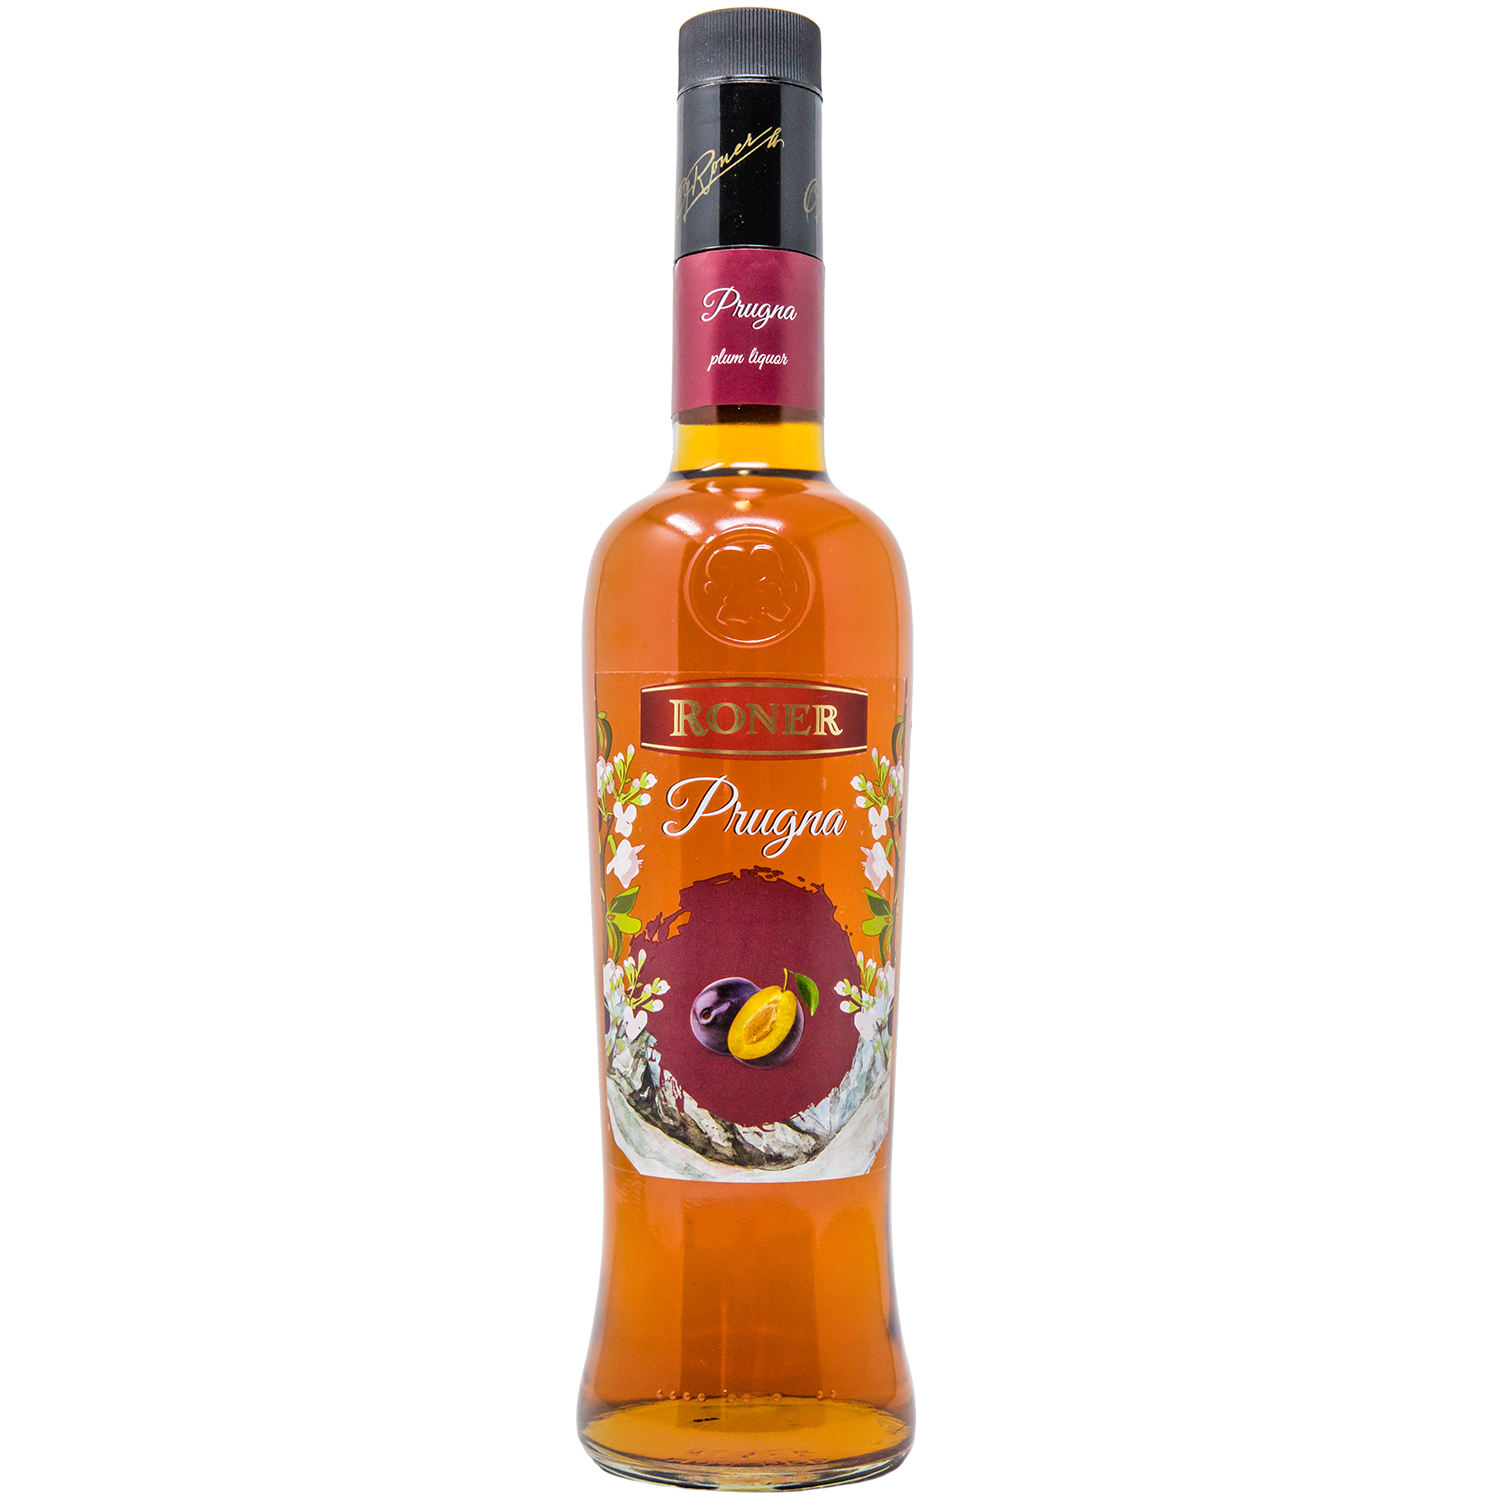 Prugna Plum Liqueur by Roner in 700ml bottle